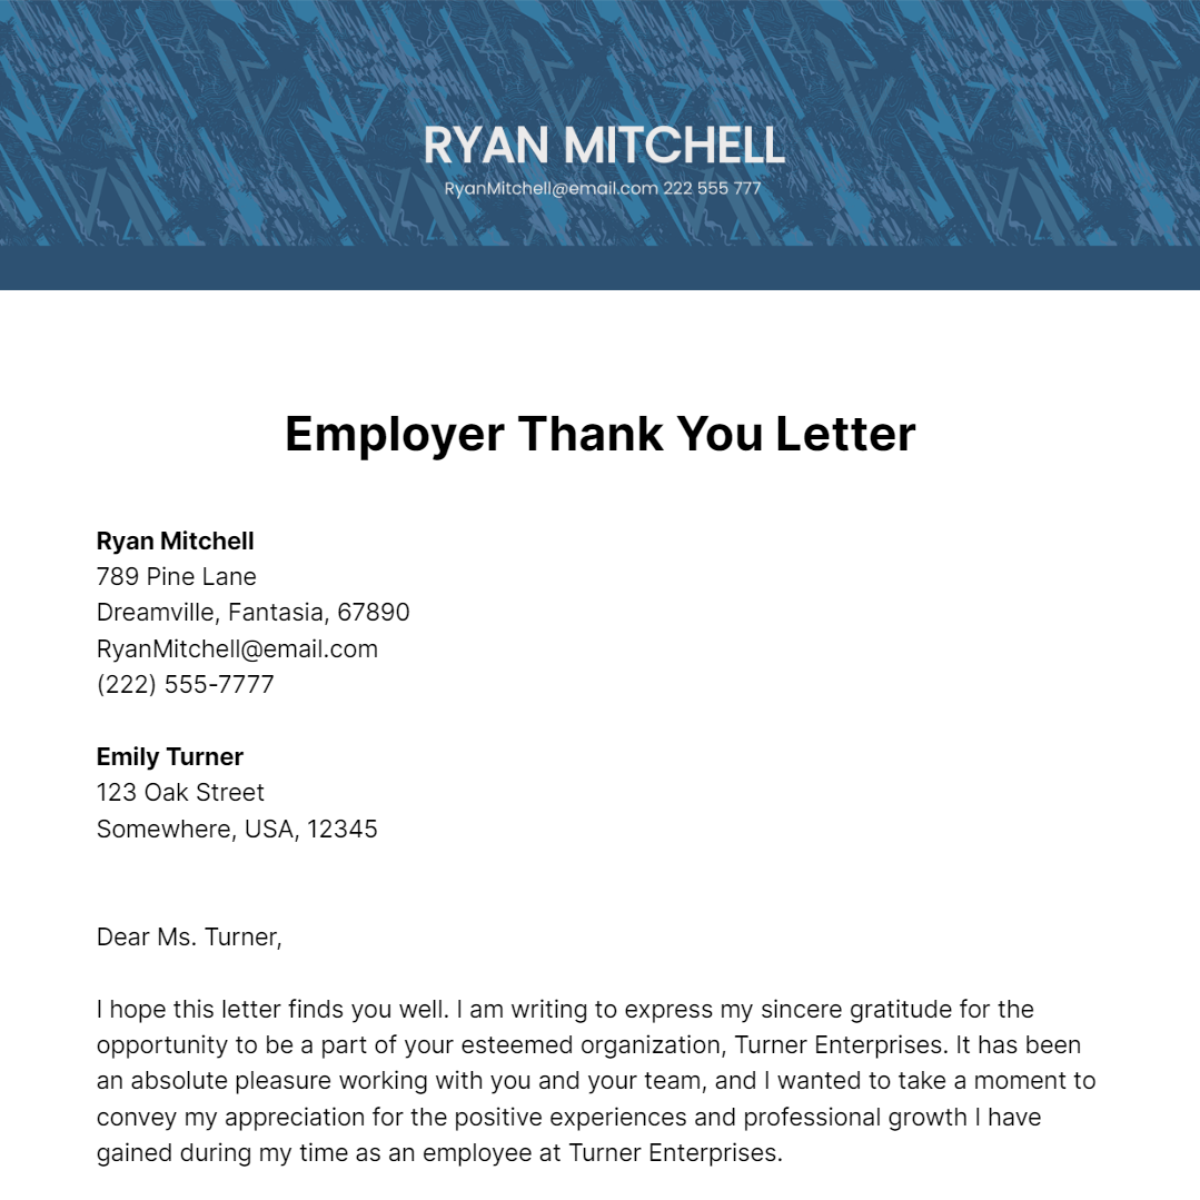 Employer Thank You Letter Template